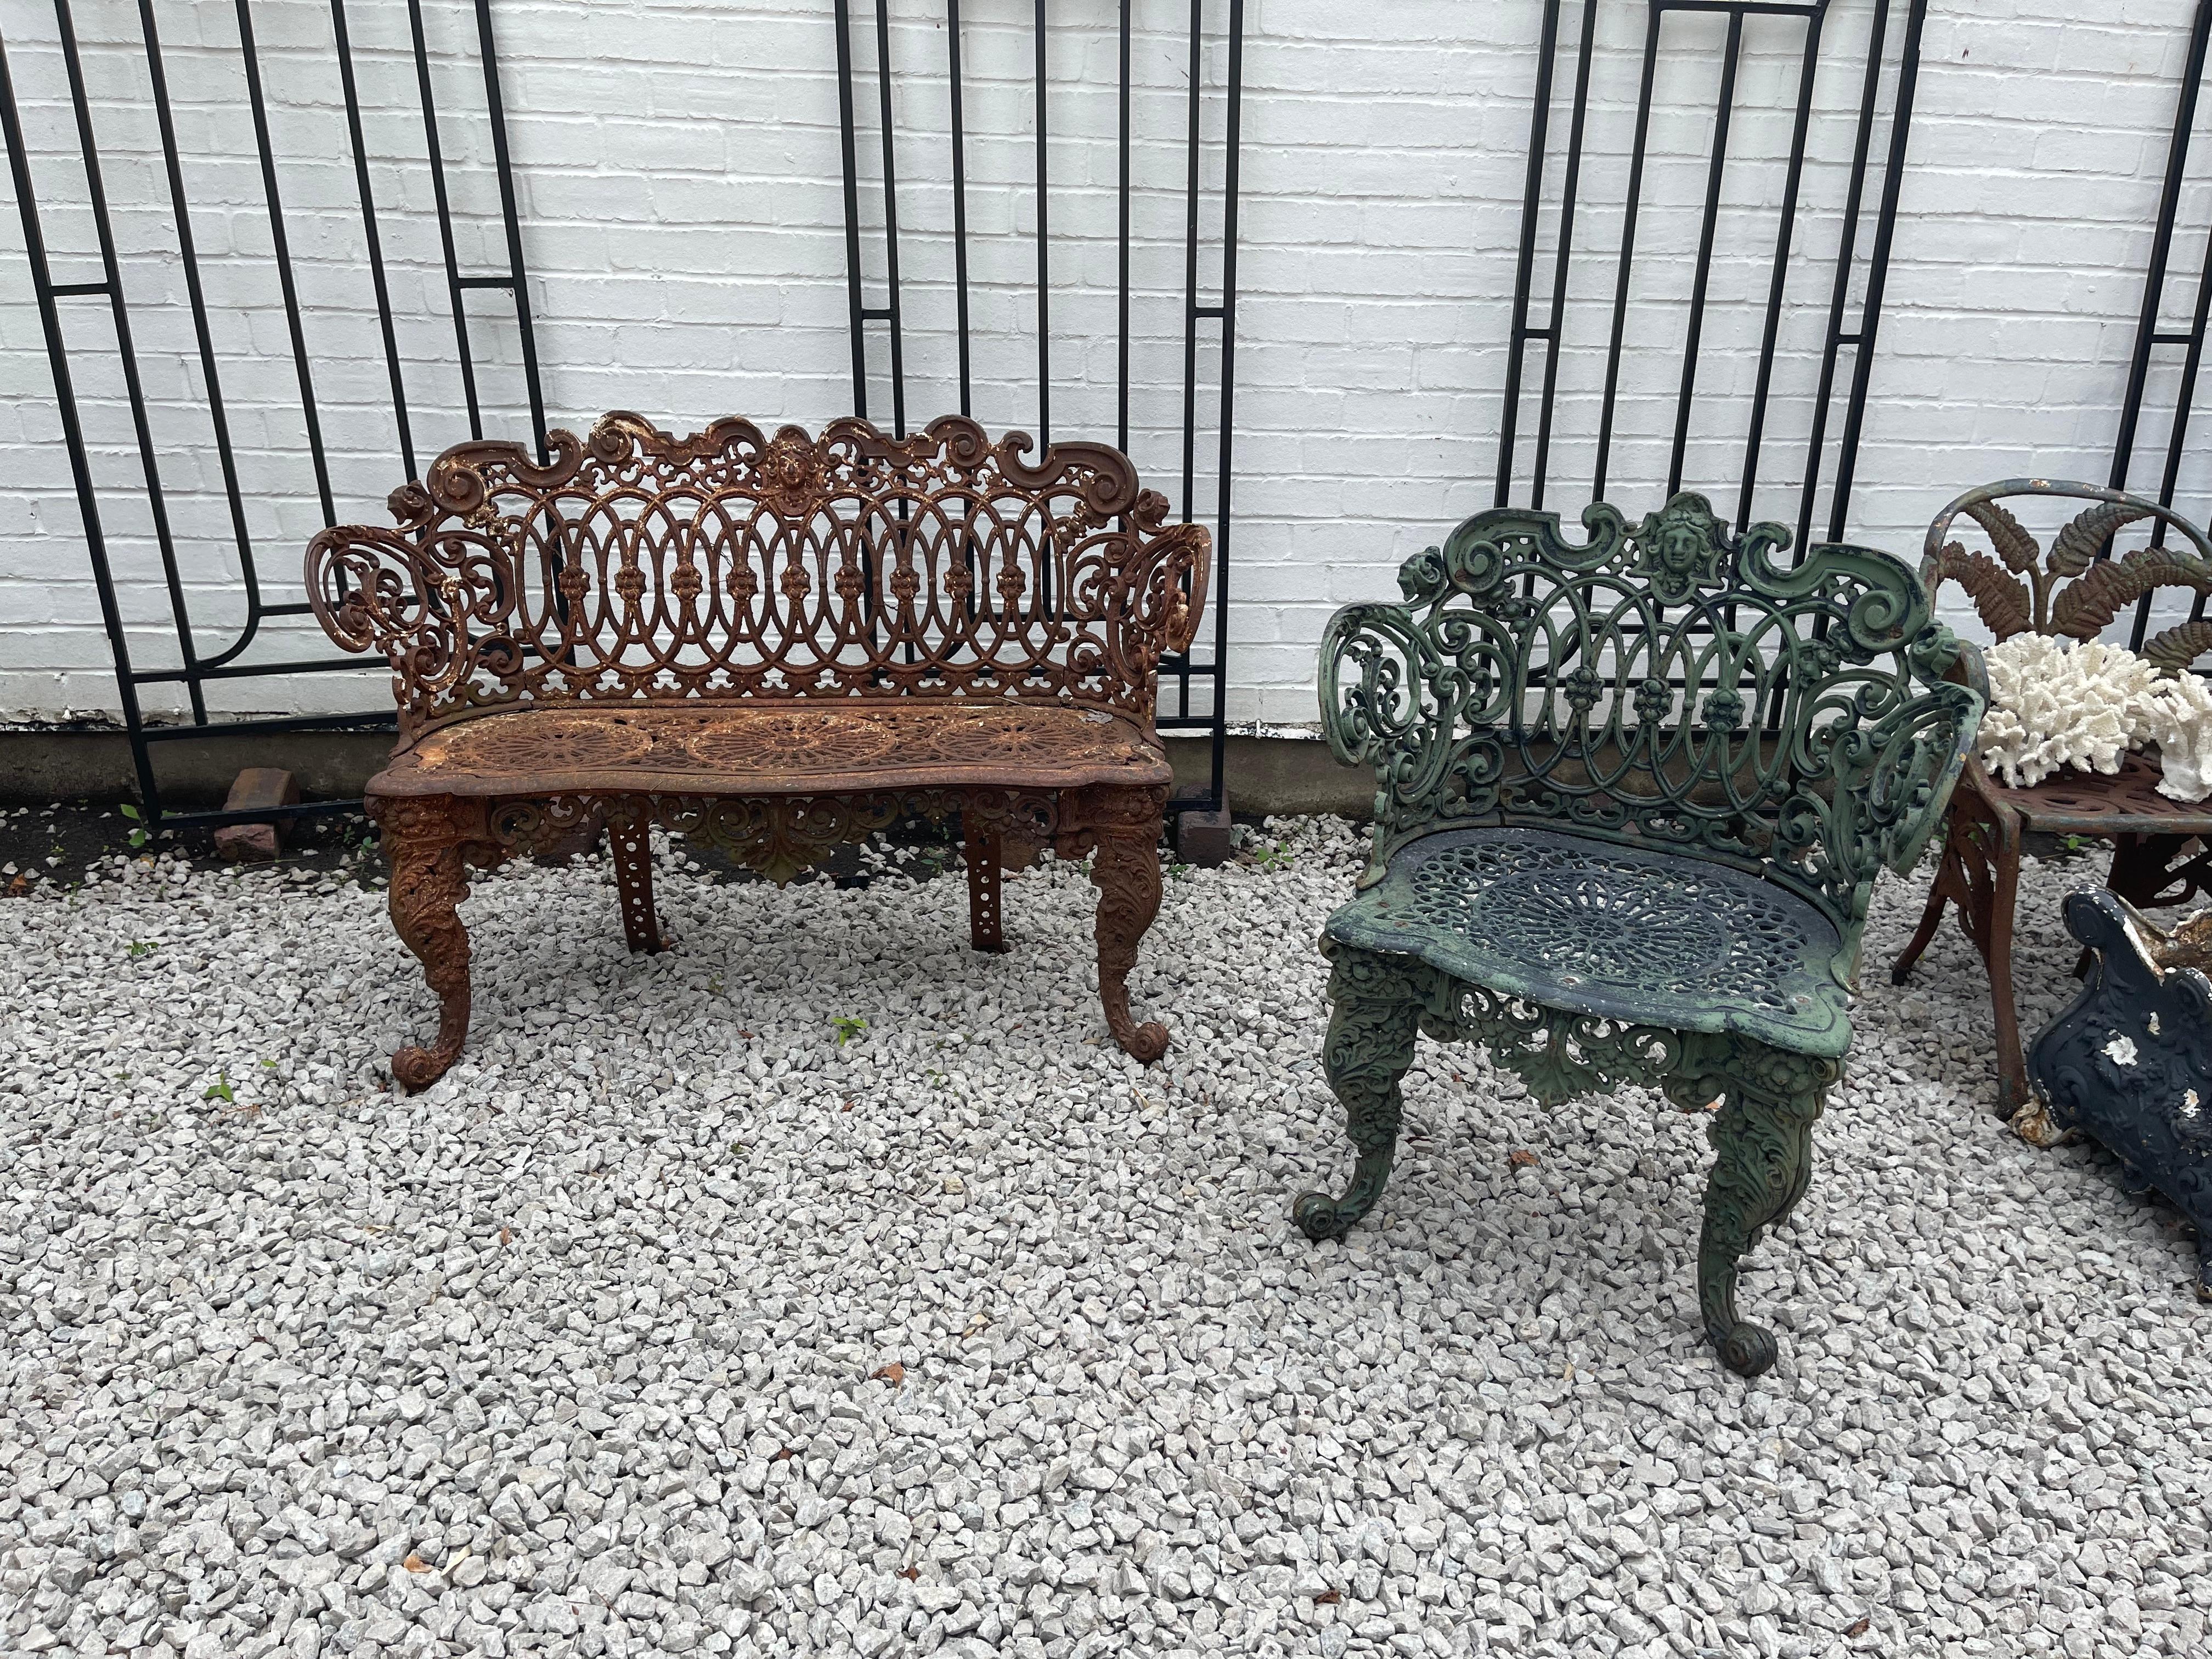 Late nineteenth century elegant American cast iron garden suite, the design is a blend is taken from the rococo revival and the Renaissance revival styles. This lot consists of settee and one chair. The seat back with continuous interlocking ovals